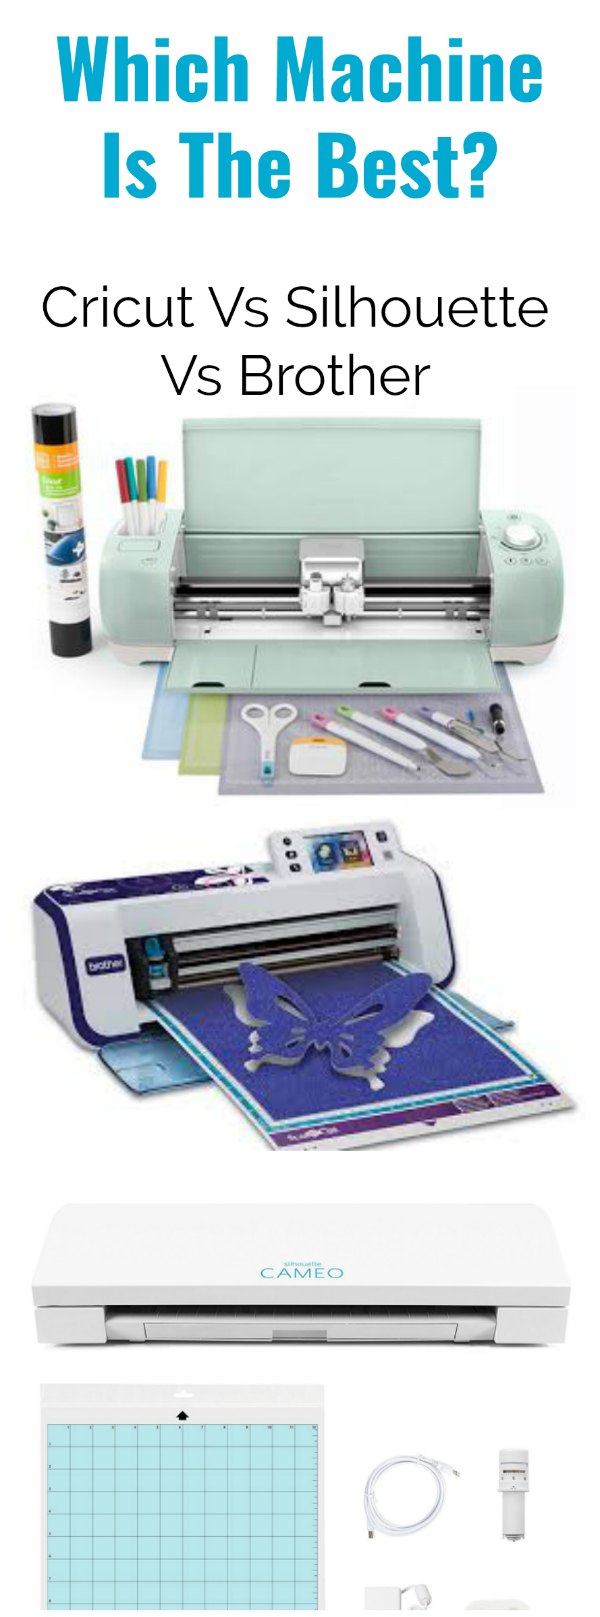 How is the cricut different from other cutting machines?